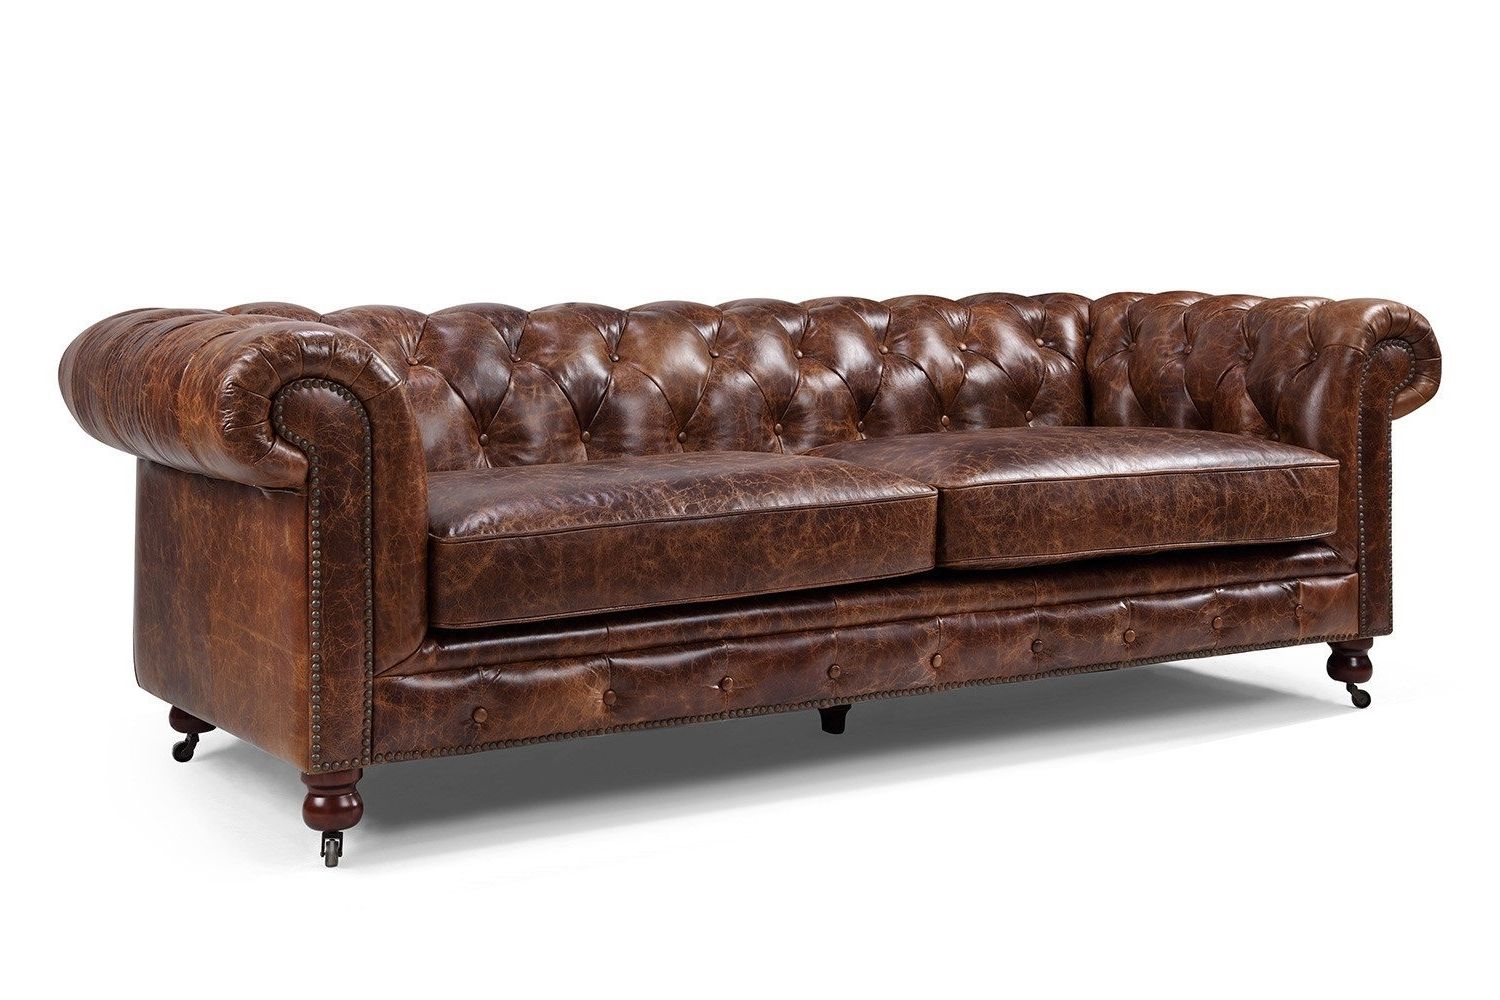 Tufted Leather Chesterfield Sofas Inside Popular Amazon: Kensington Chesterfield Tufted Sofarose & Moore (View 11 of 15)